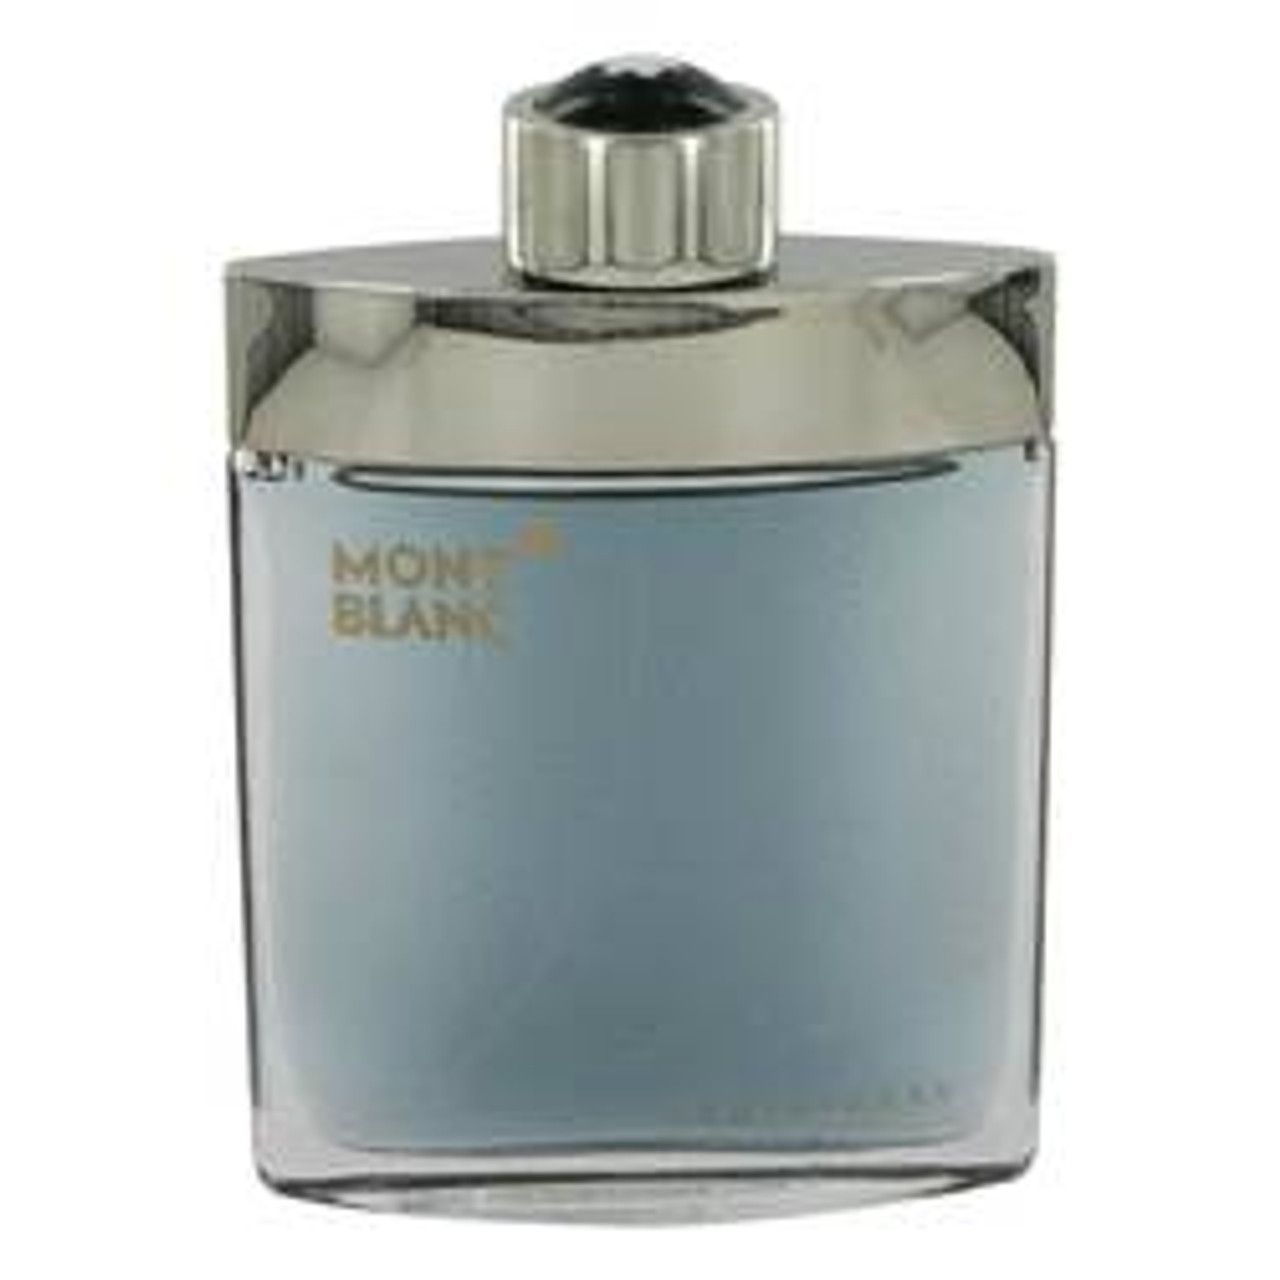 Individuelle Cologne By Mont Blanc Eau De Toilette Spray (Tester) 2.5 oz for Men - [From 71.00 - Choose pk Qty ] - *Ships from Miami